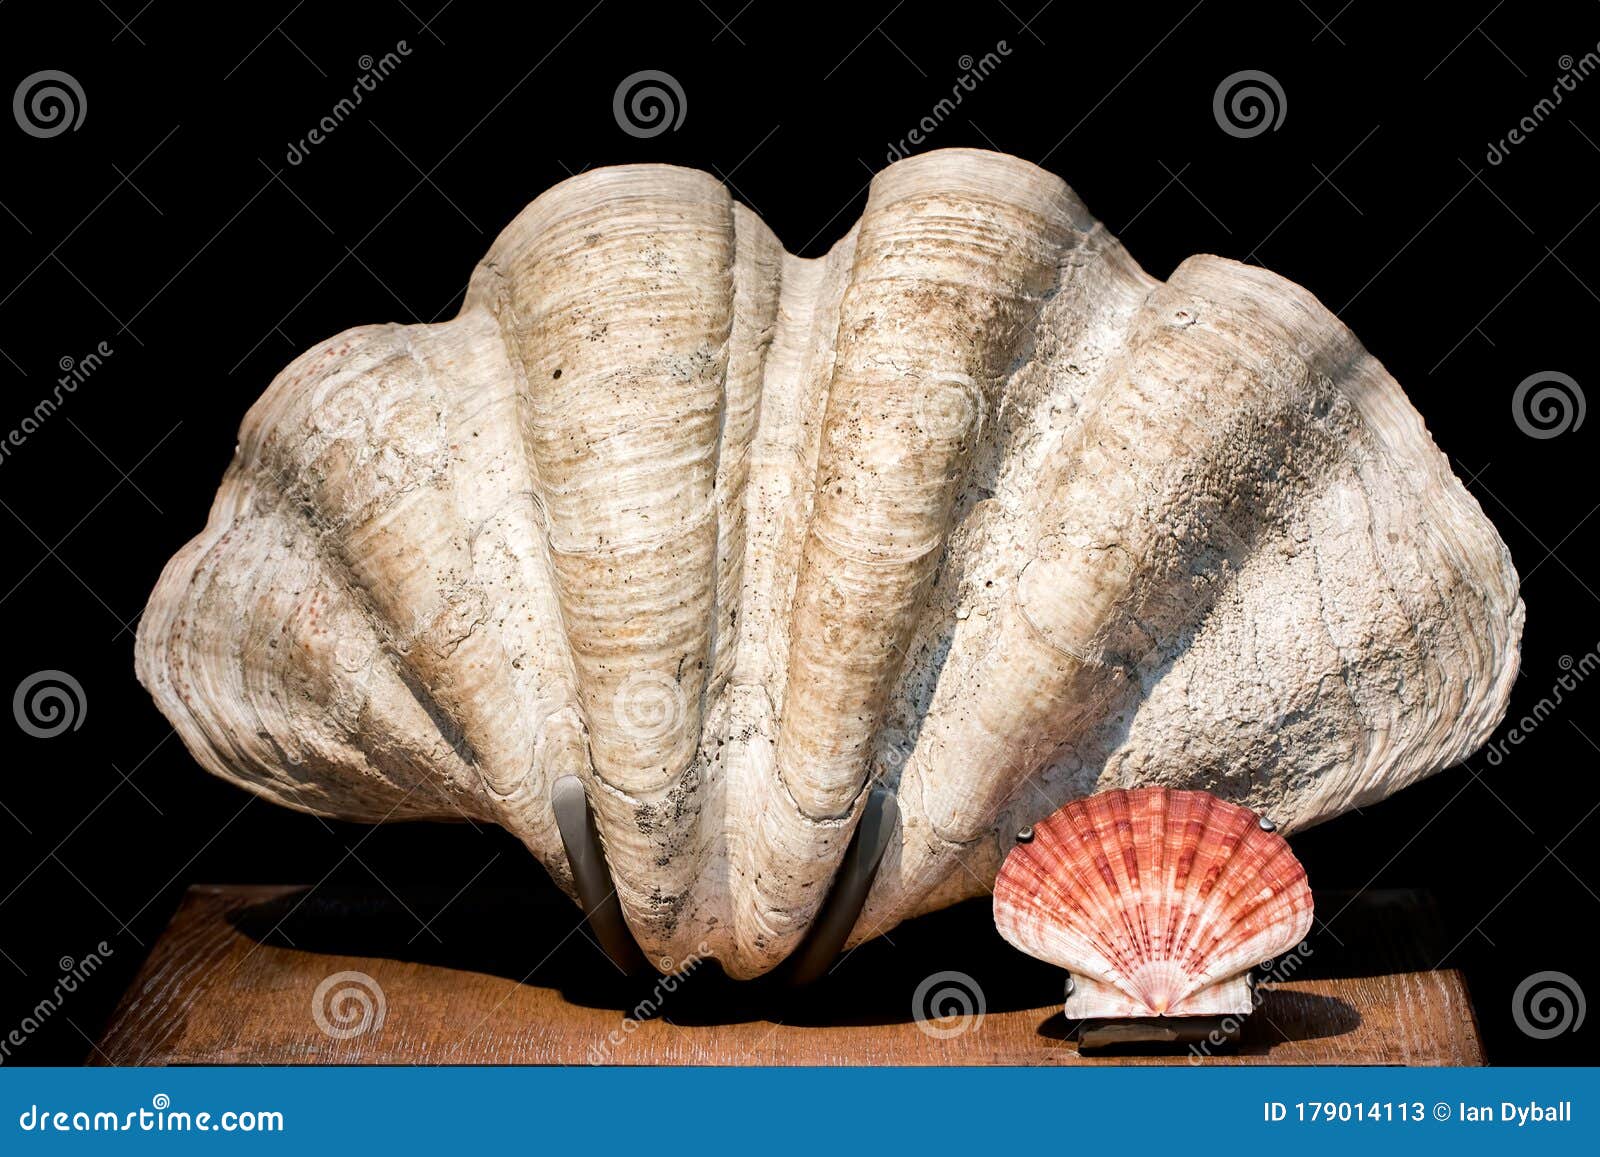 giant clam tridacna gigas bivalve mollusk and scallop shell specimens